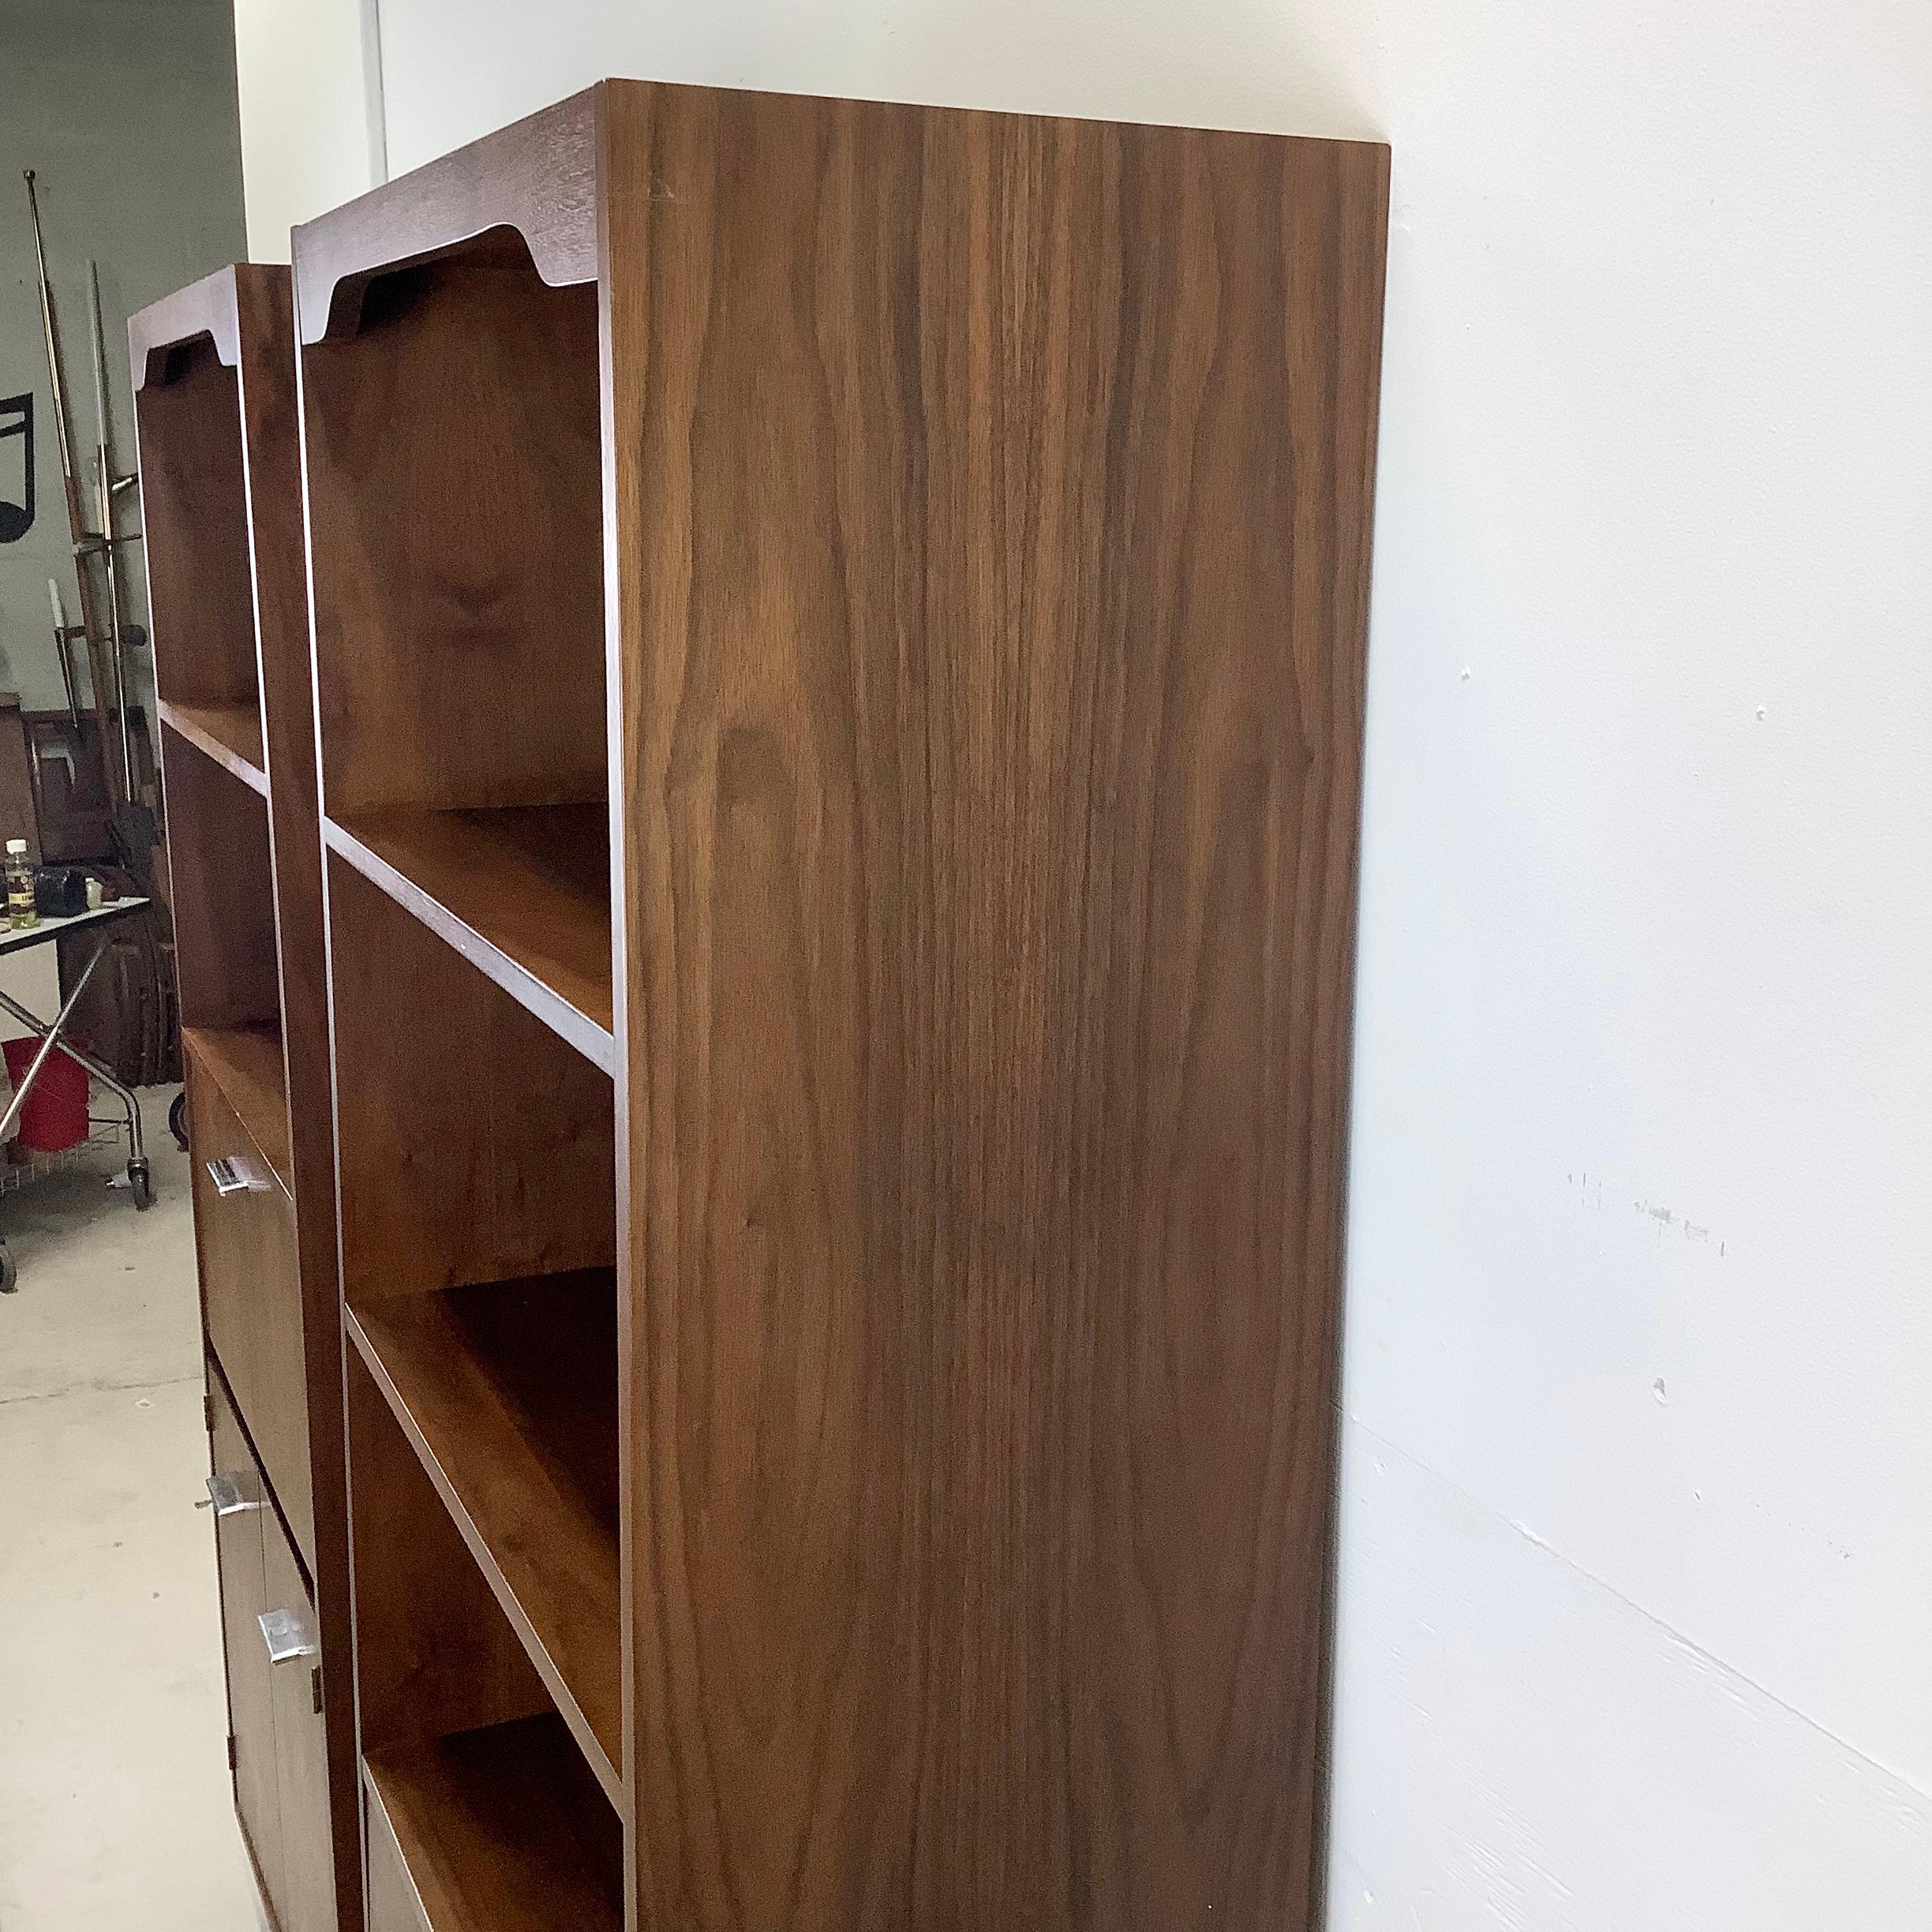 Tall Vintage Bookshelves With Drop Front Cabinet & Drawers For Sale 2